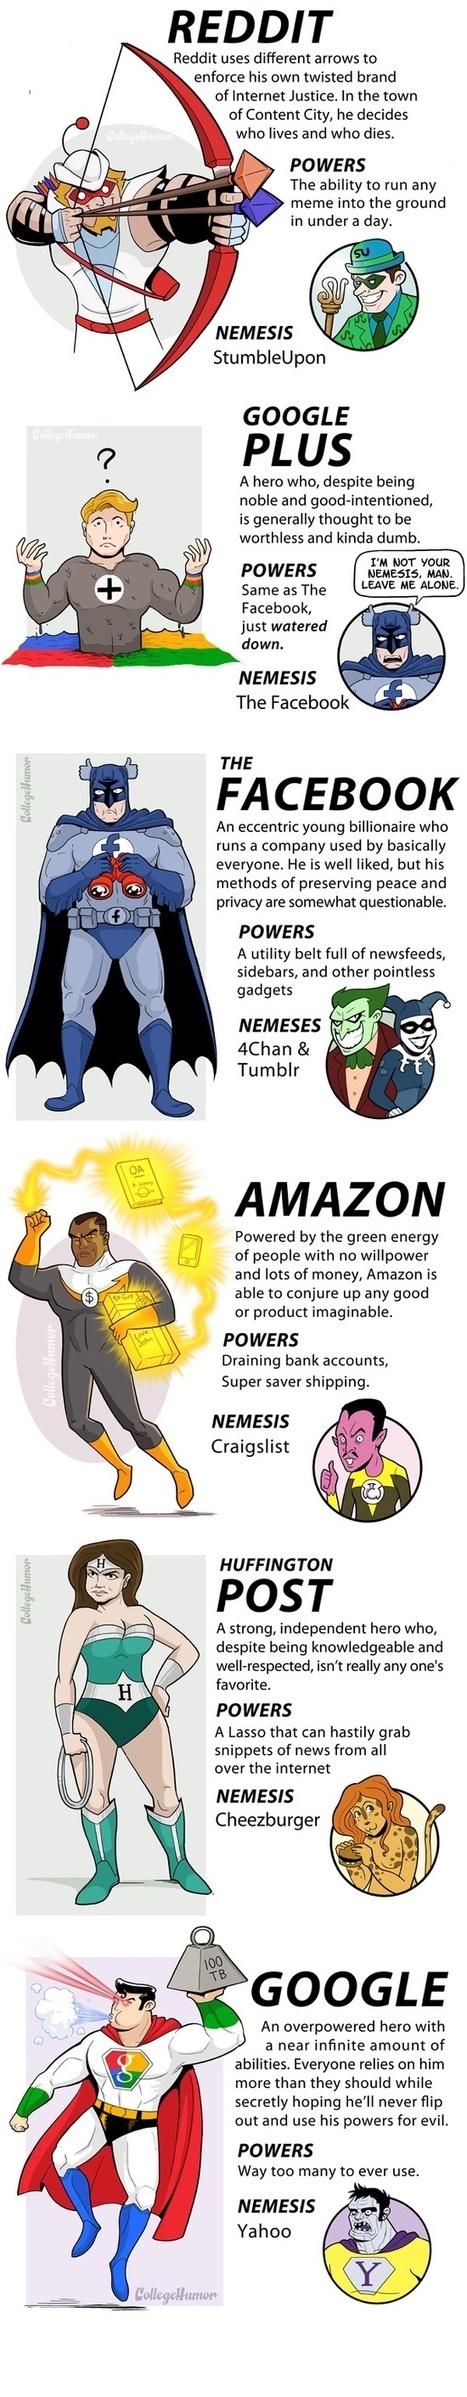 Social media as super heroes Infographic | Latest Social Media News | Scoop.it